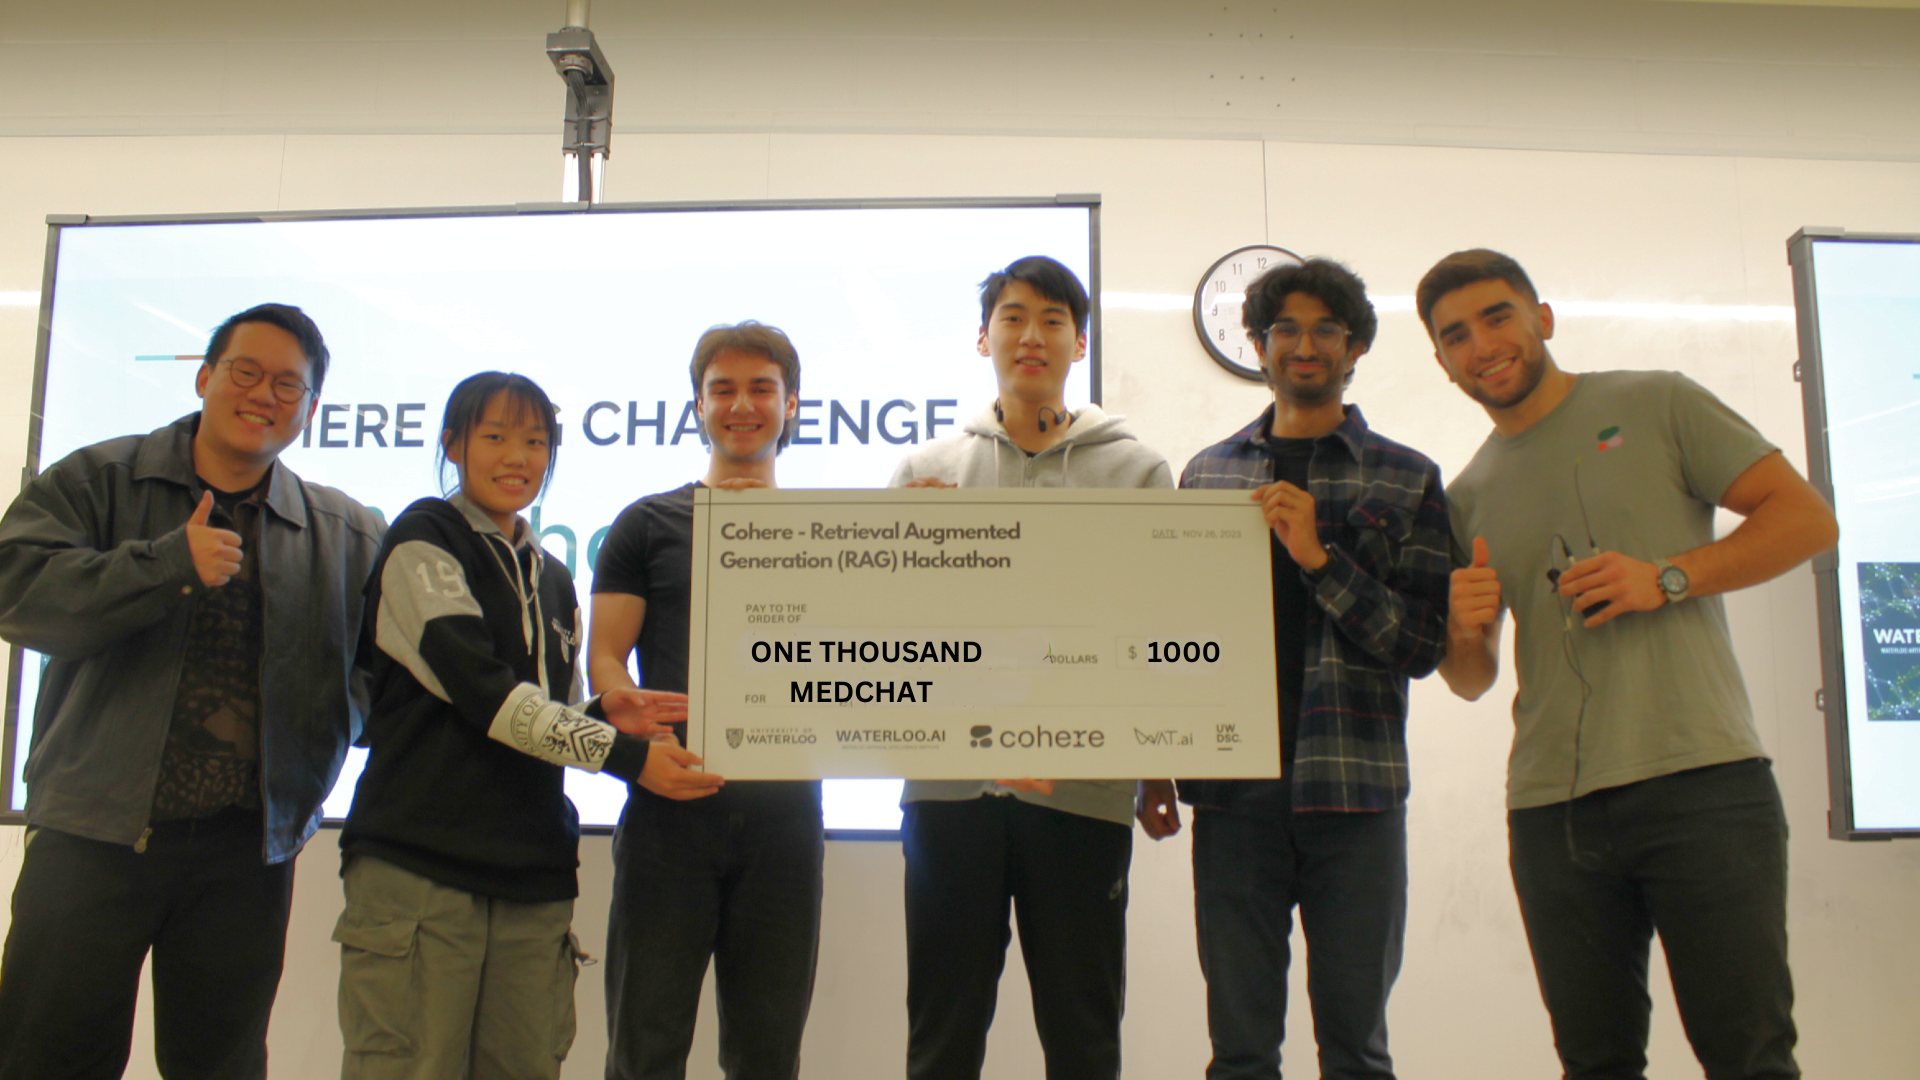 The Medchat team (L-R: Yilei Wang, Carter Demars, Ken Wu, and Areel Khan) holding a $1000 cheque, flanked by Ivan Zhang and Faraz Khoubsirat